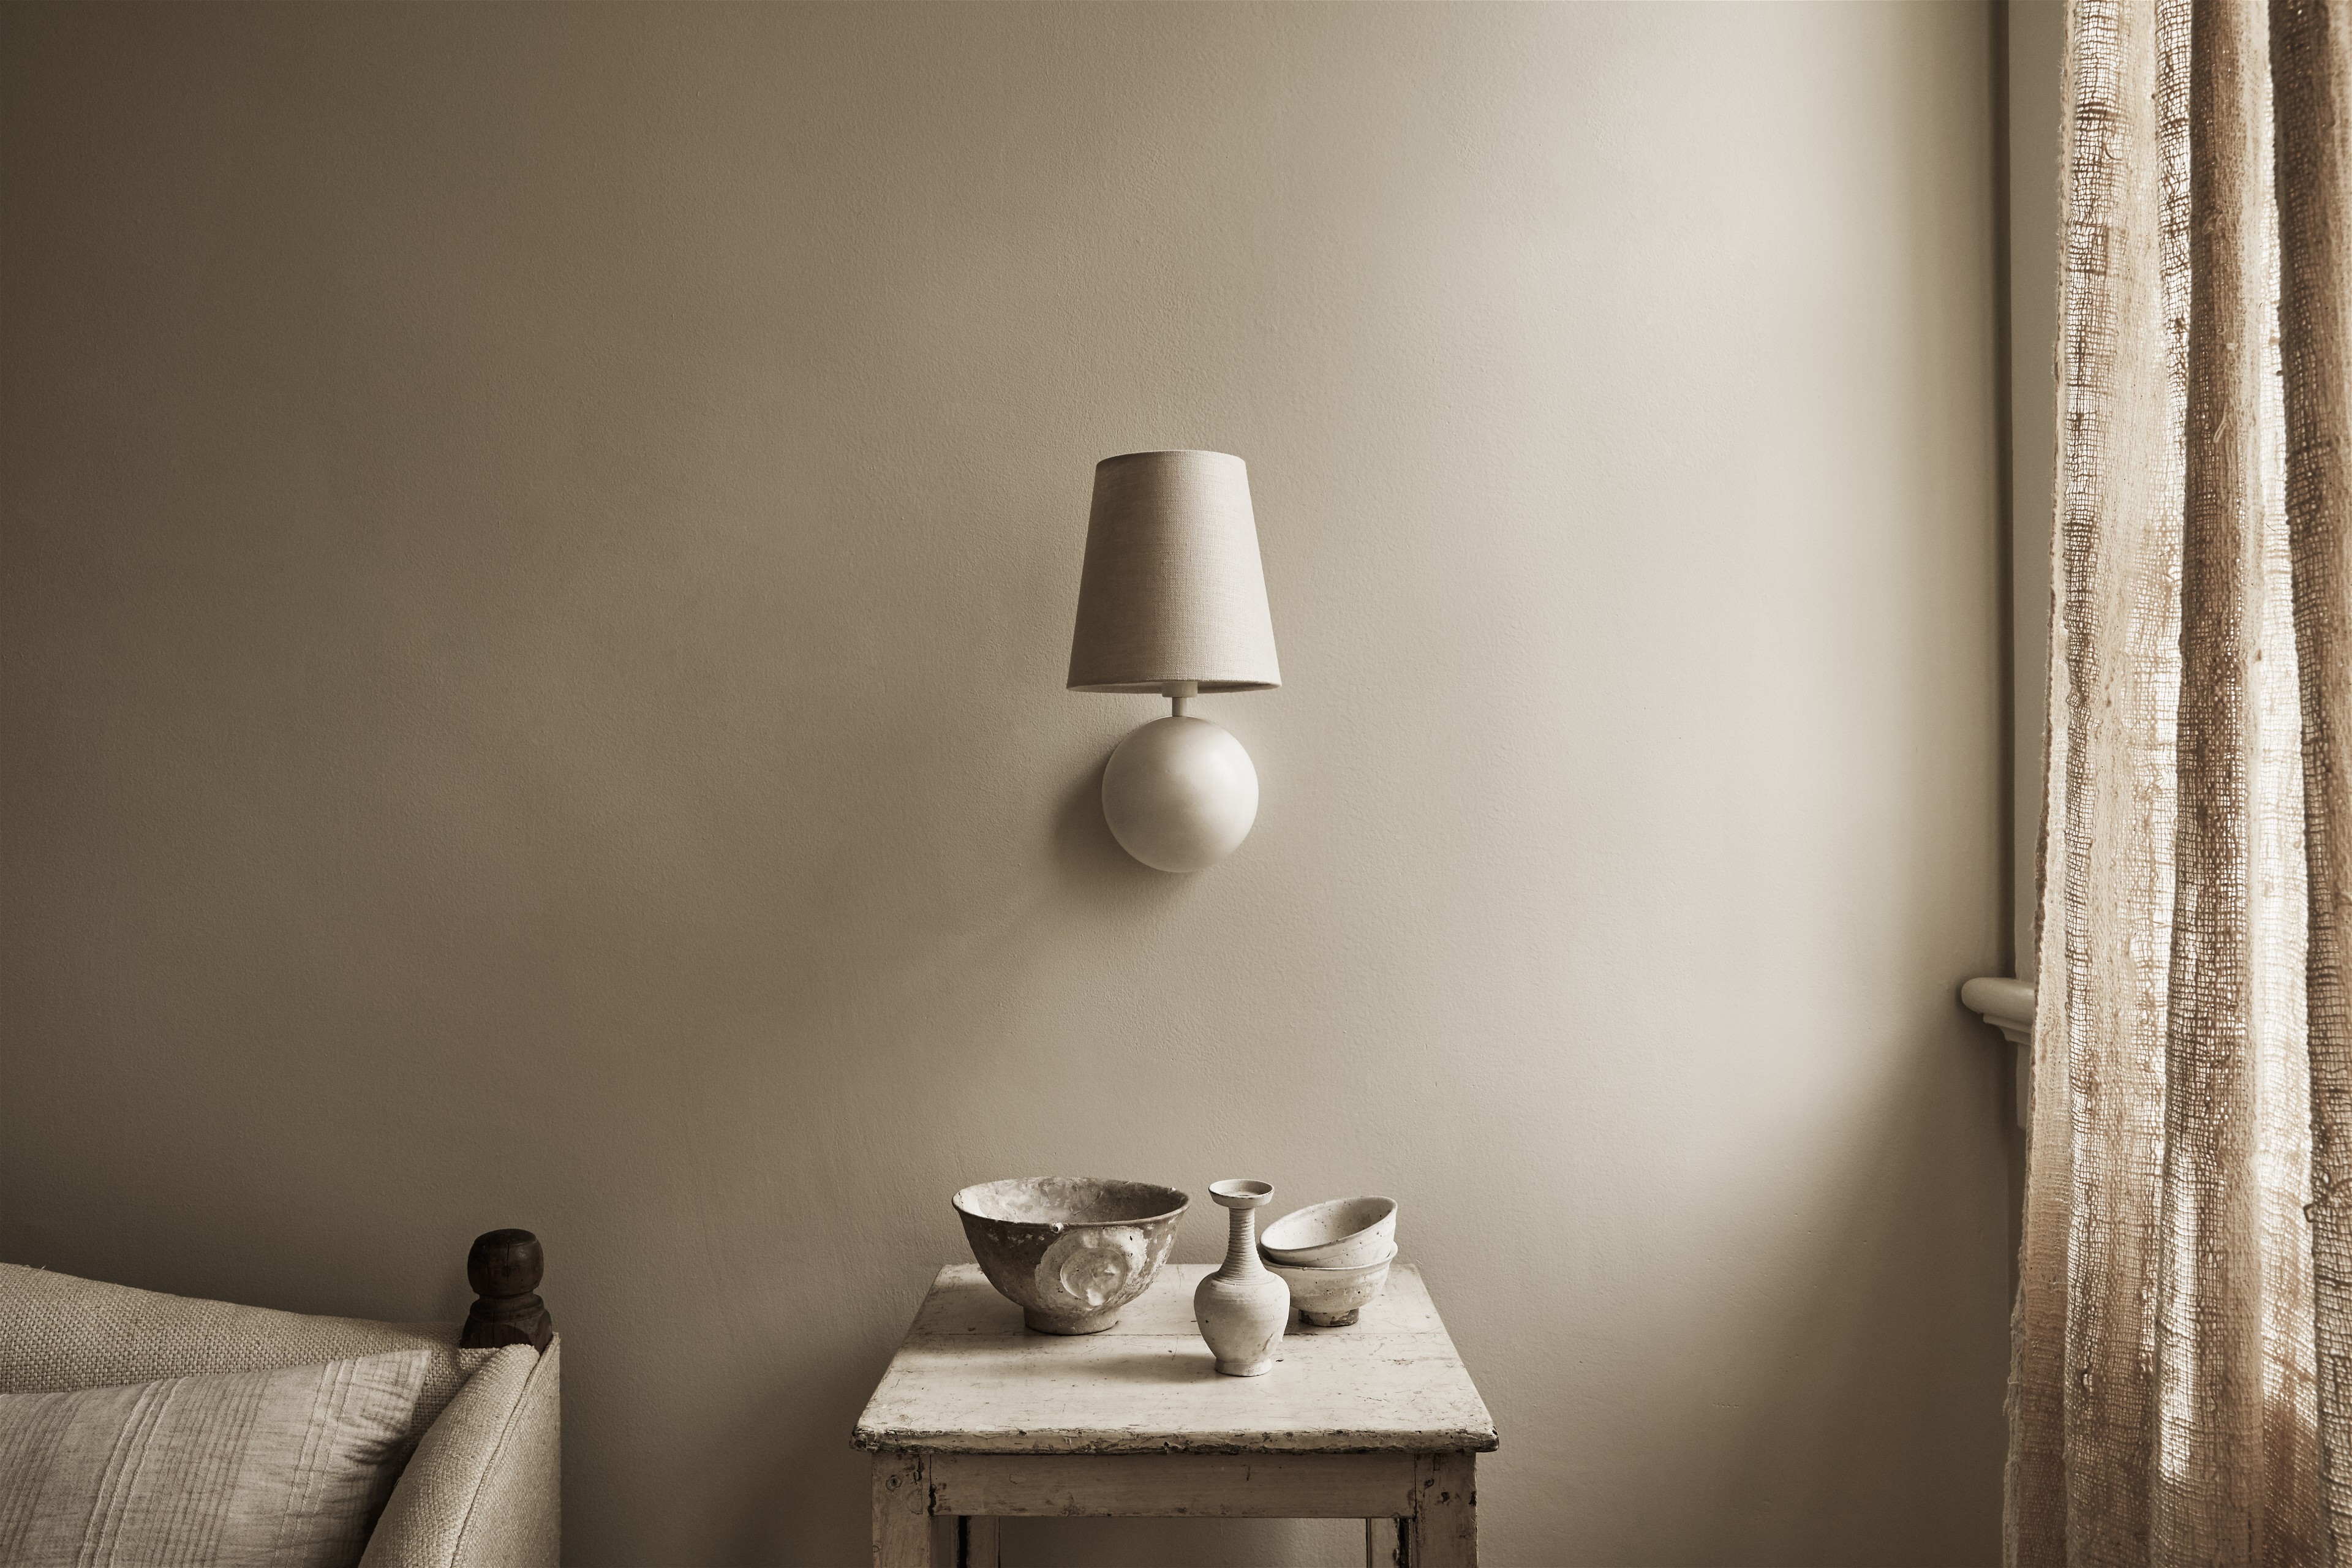 a table with bowls on it next to a lamp